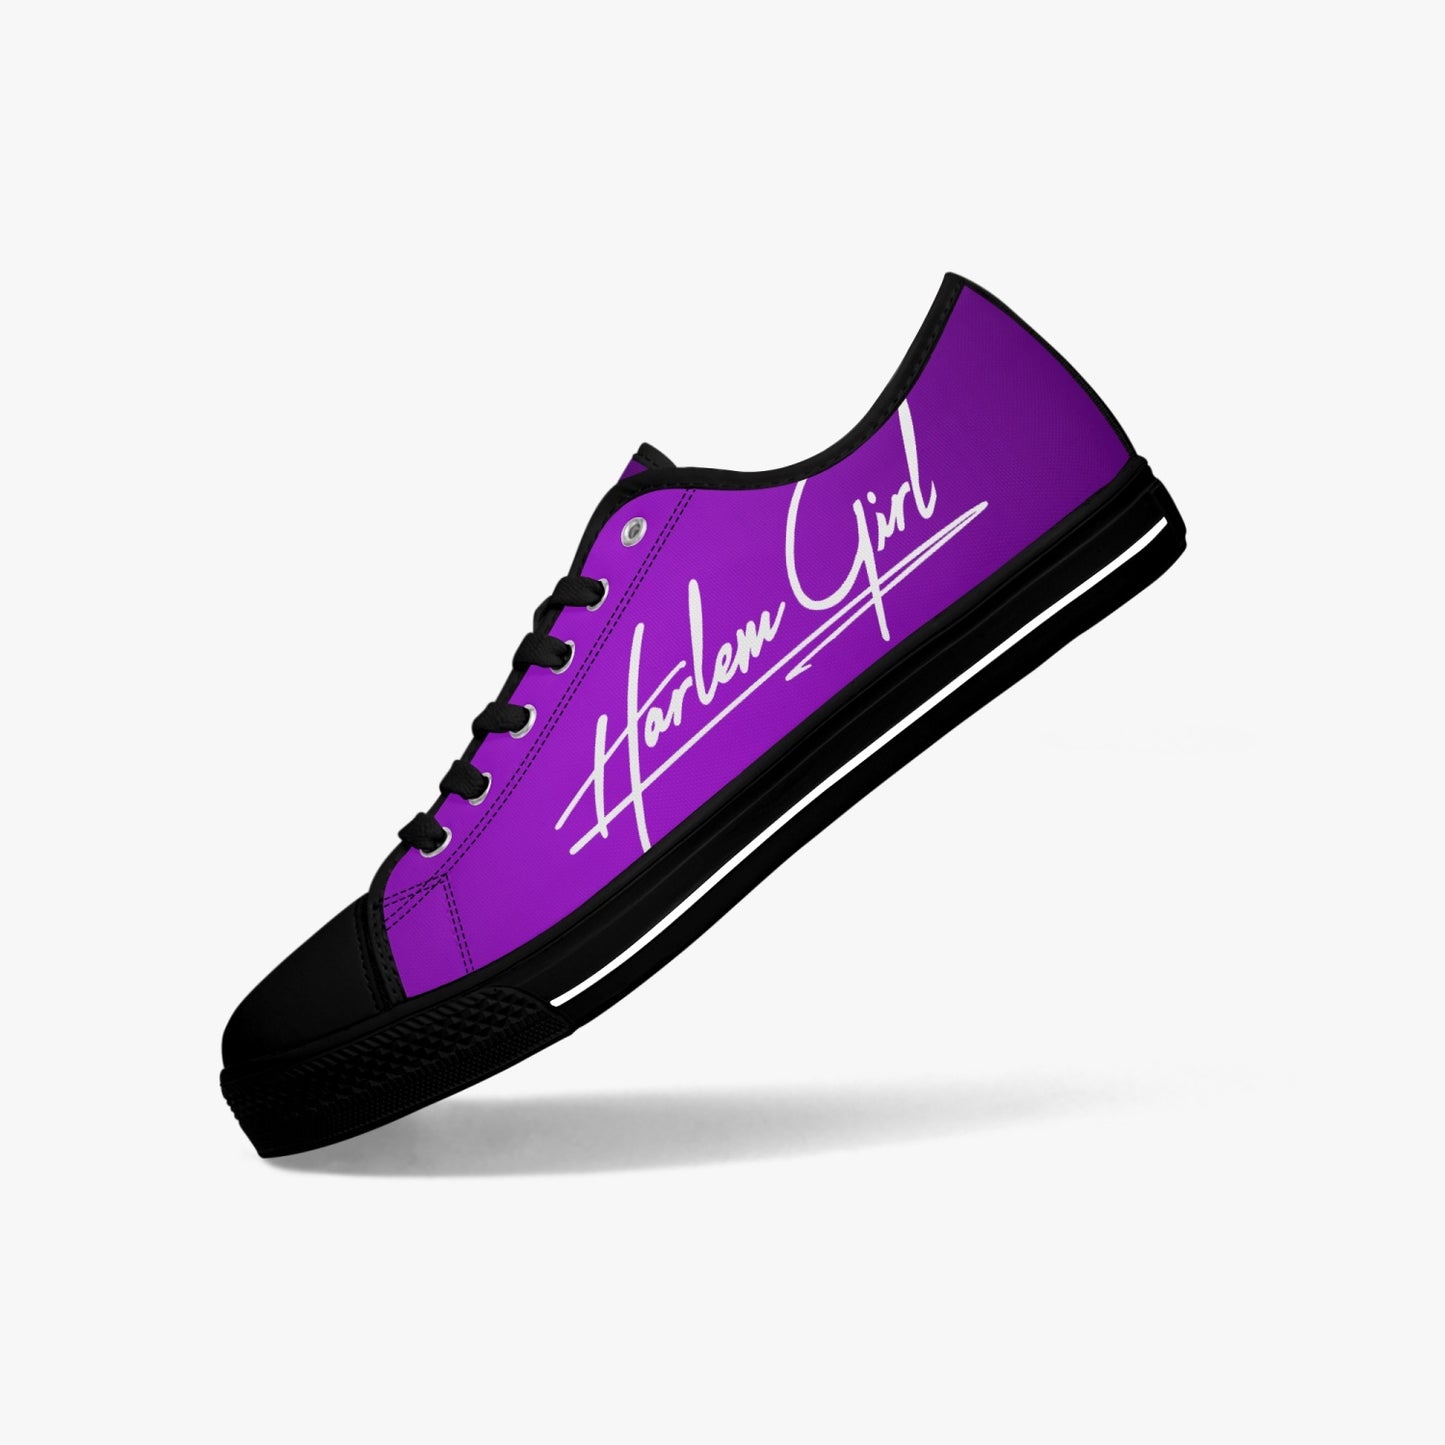 HB Harlem Girl "Lenox Ave" Classic Low Tops - Amethyst - Women (Black or White Sole)